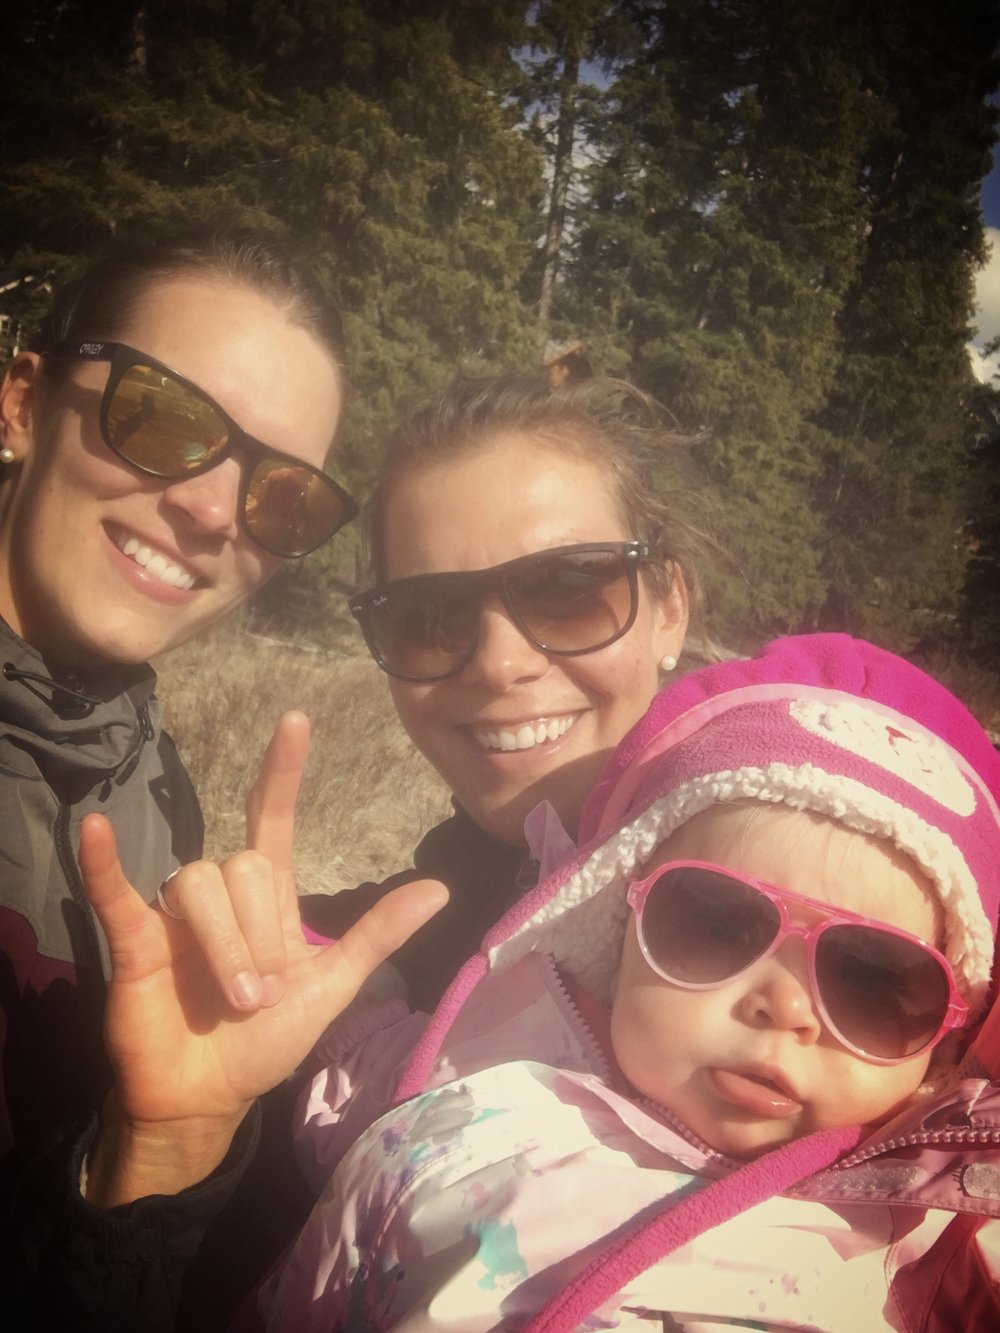  Walking with some rock stars. My sister, Ange, and niece, Evia. This little peanut is my new favourite bundle to hang with. So much love!! 